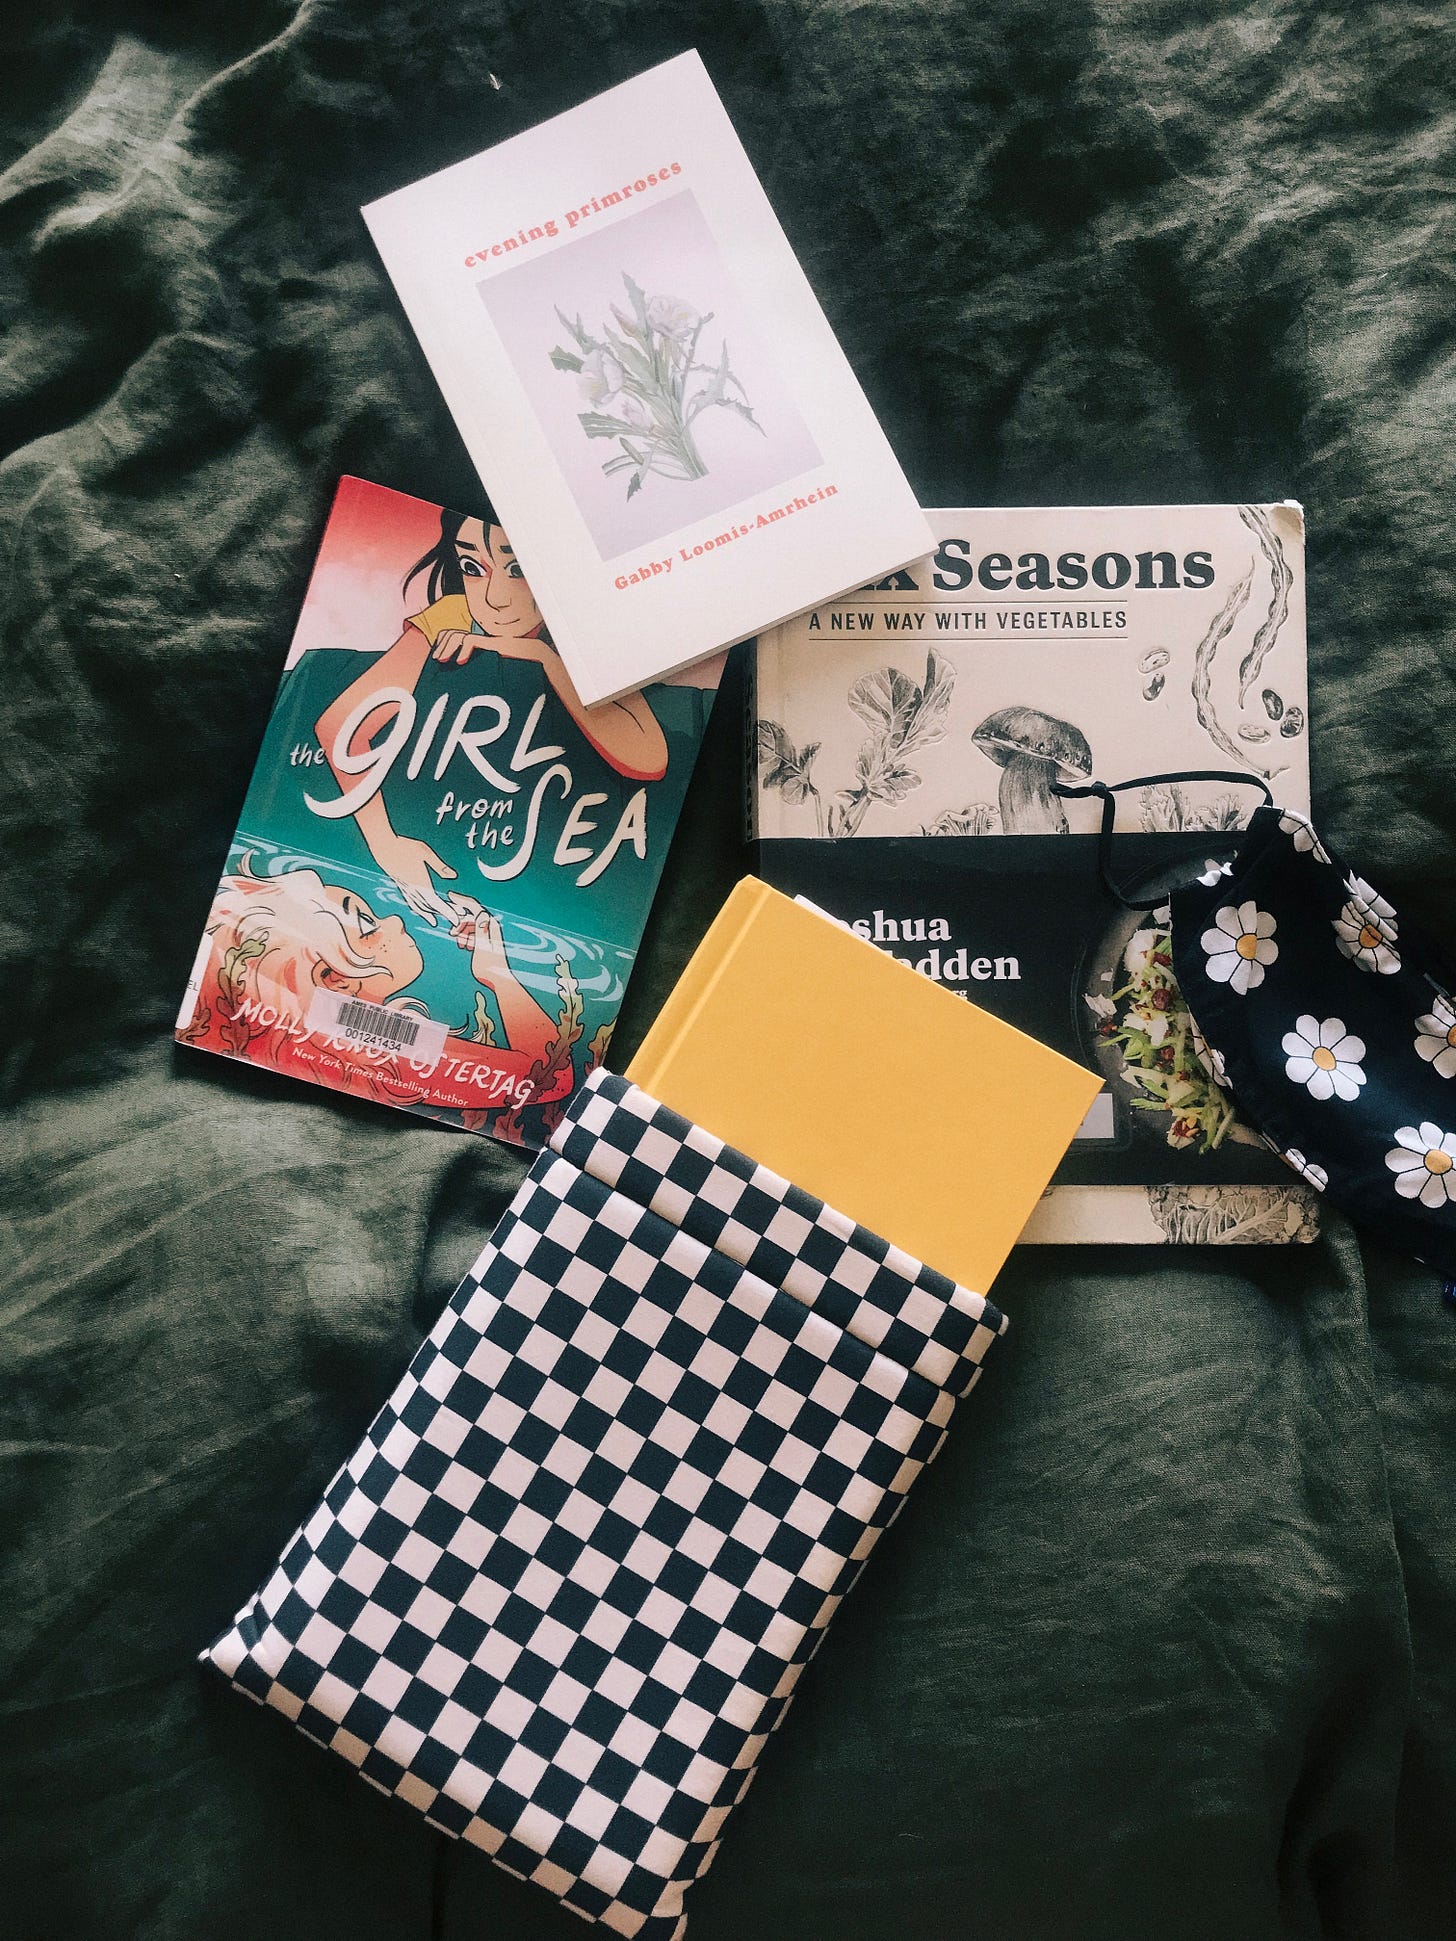 Four books on top of a dark green duvet. evening primroses is at the top of the diamond. On the left side is The Girl from the Sea. On the right side is Six Seasons. On the bottom is a yellow book with no title, sticking out from a black and white book sleeve. A black face mask with white flowers is also in the frame.